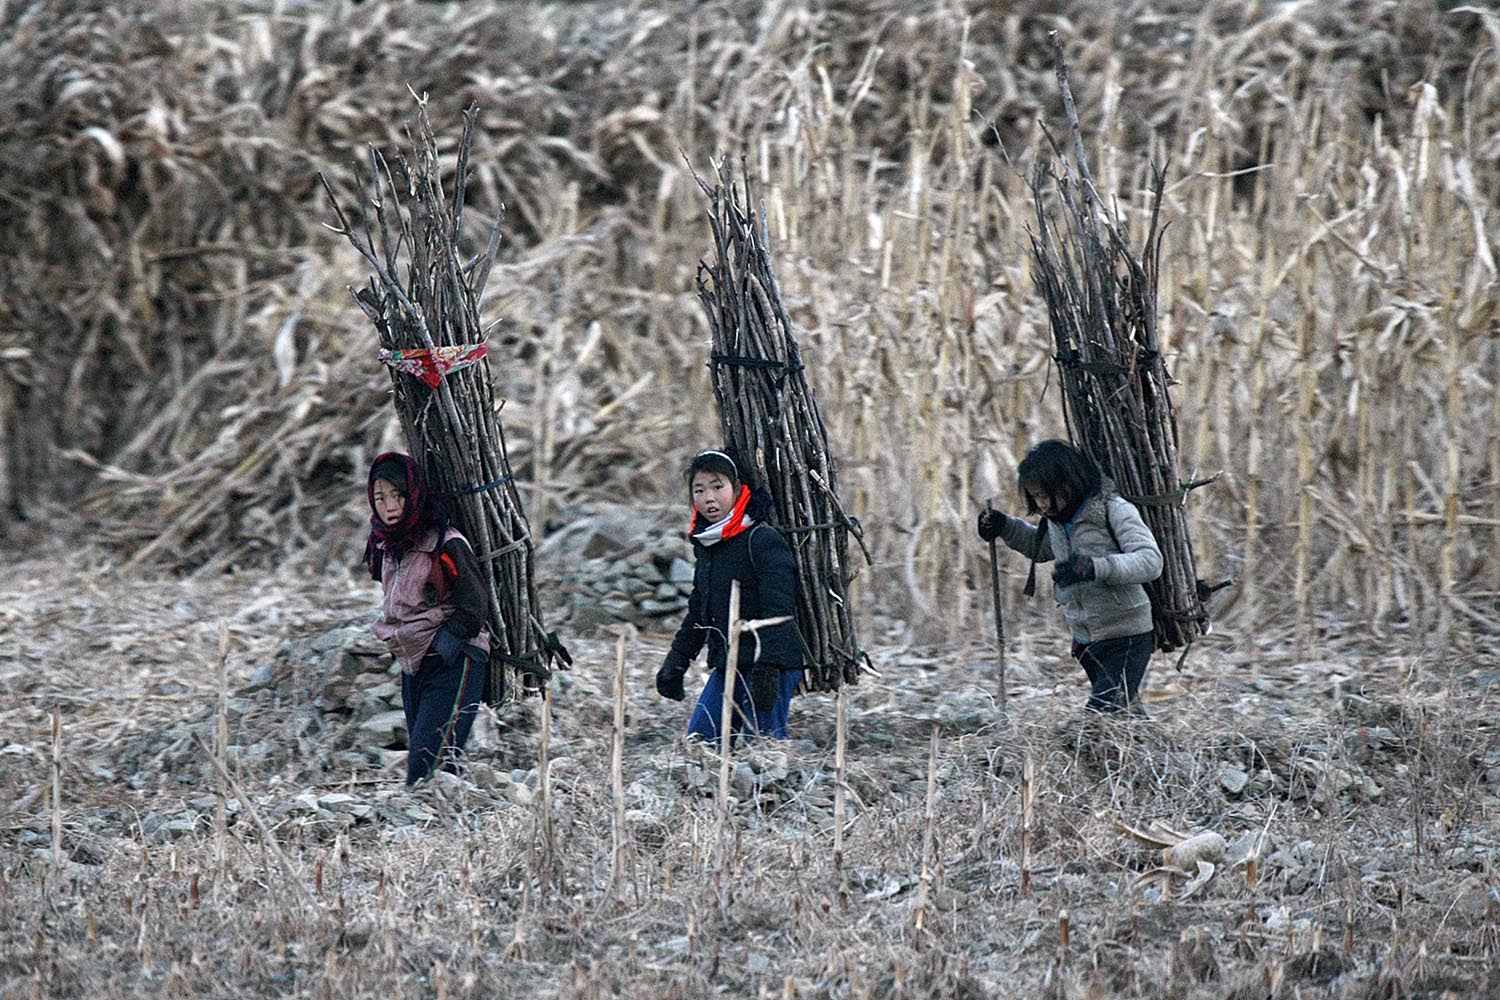 North Korean girls carry firewood as they walk on the banks of Yalu River, near the North Korean town of Sinuiju